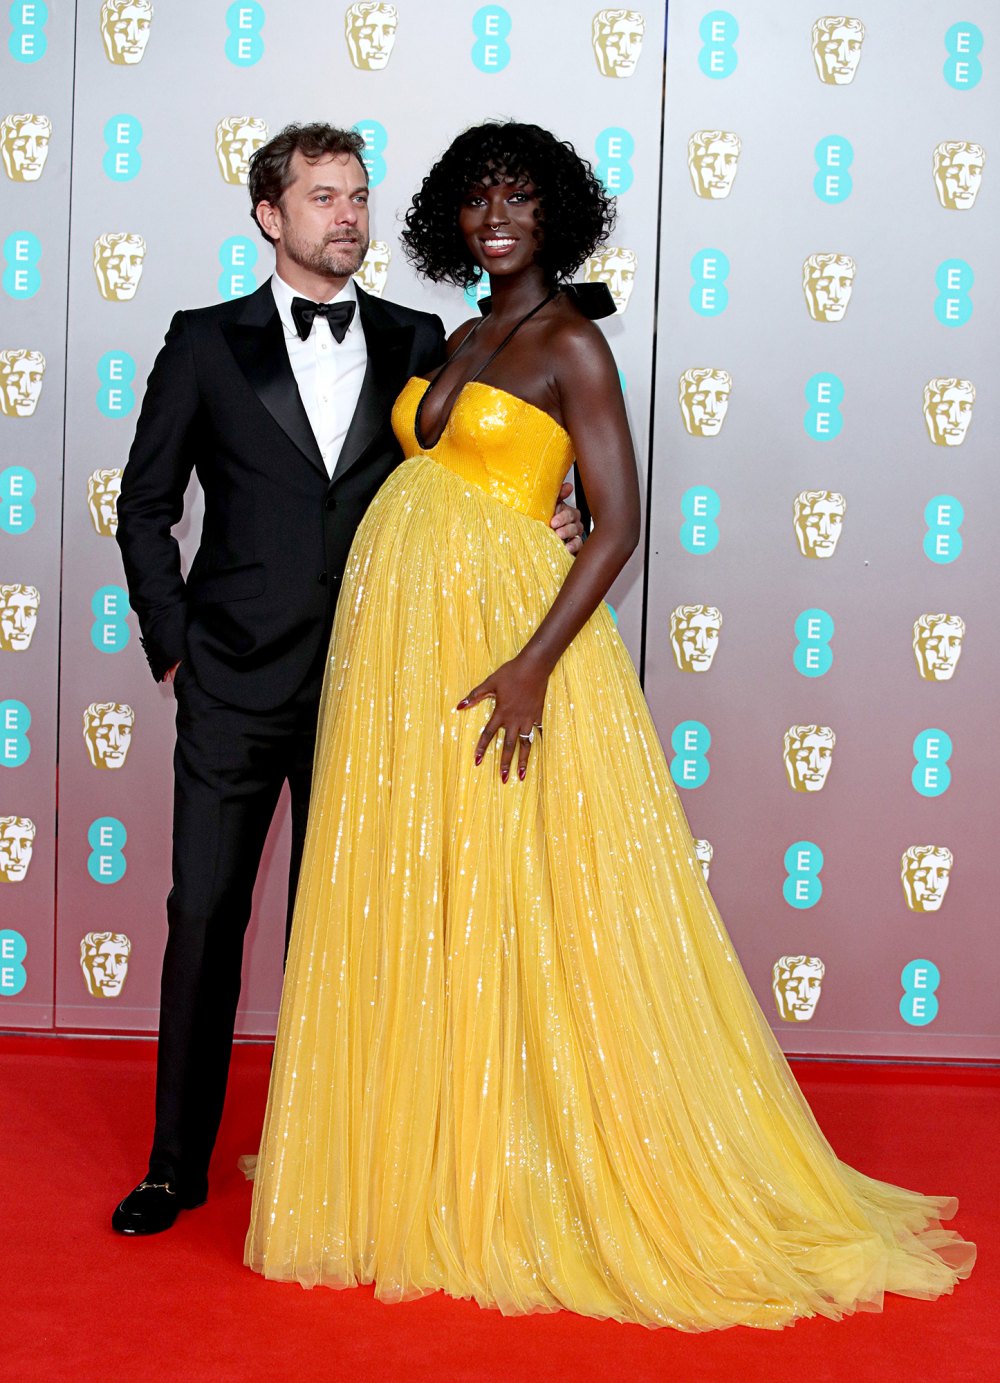 Jodie Turner-Smith rejects pressure on mothers to 'snap back' after giving birth: 'Be kind to yourself'